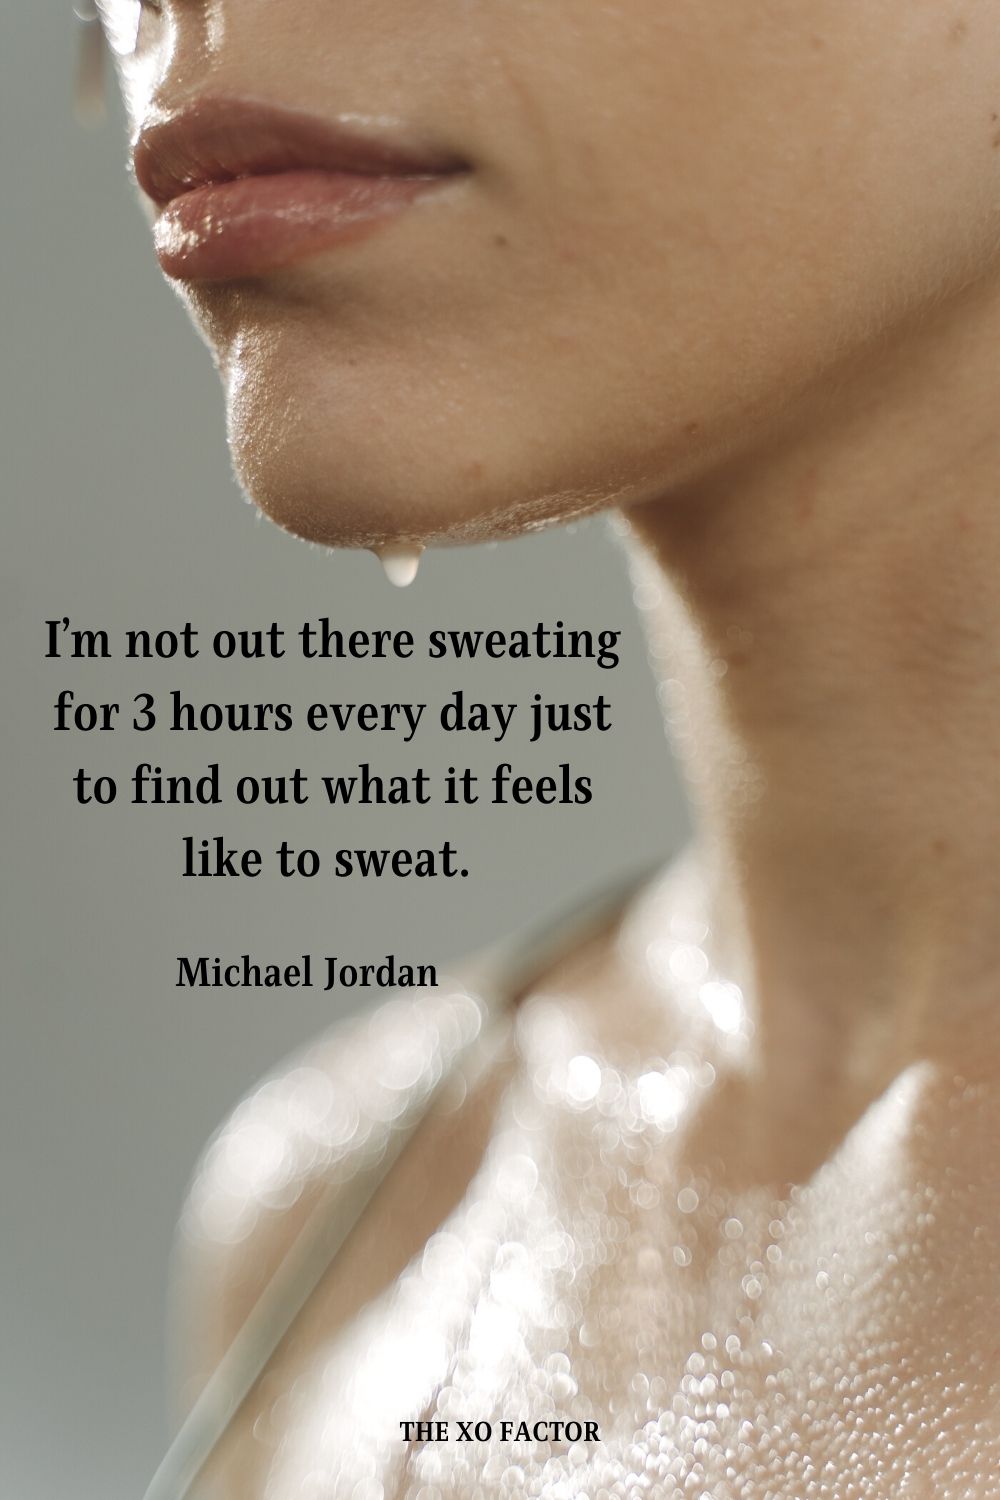 I’m not out there sweating for 3 hours every day just to find out what it feels like to sweat.  Michael Jordan